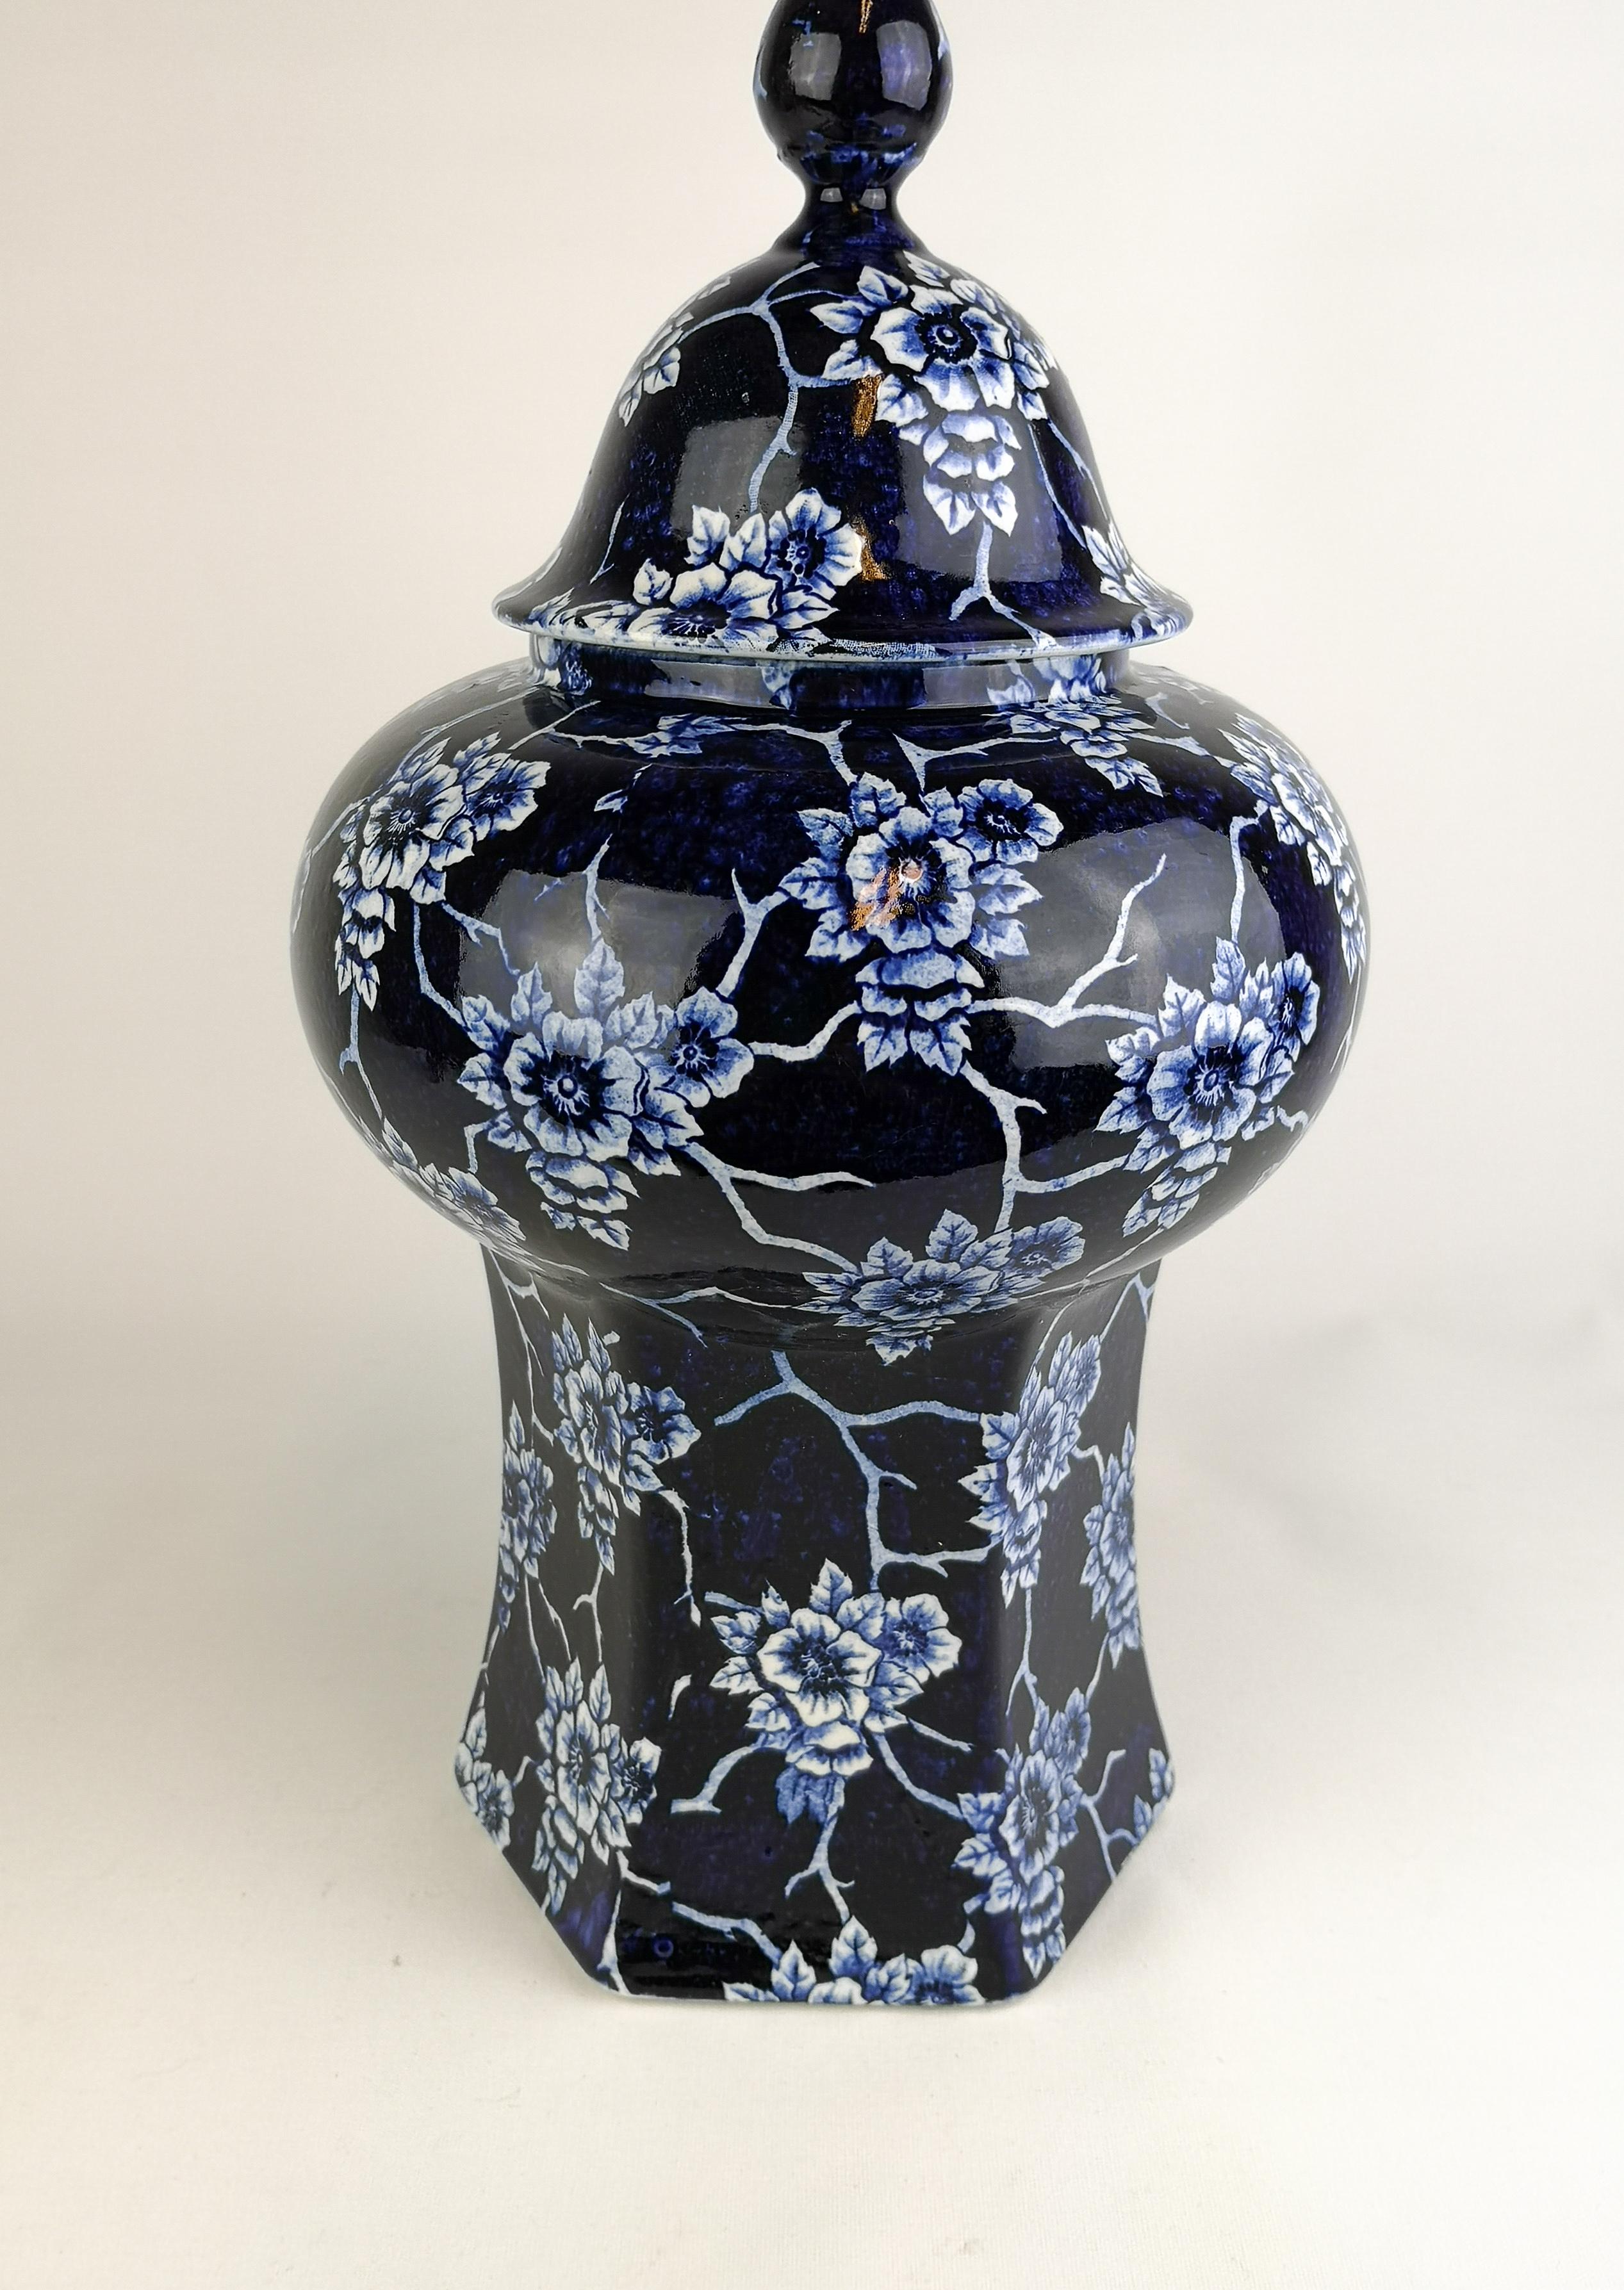 This vase is beautiful sculptured, and its blue deep color gives the flower pattern life. It was made in the early 1900s for Rörstrand Sweden.

The vas is in very good condition considering its age.
 